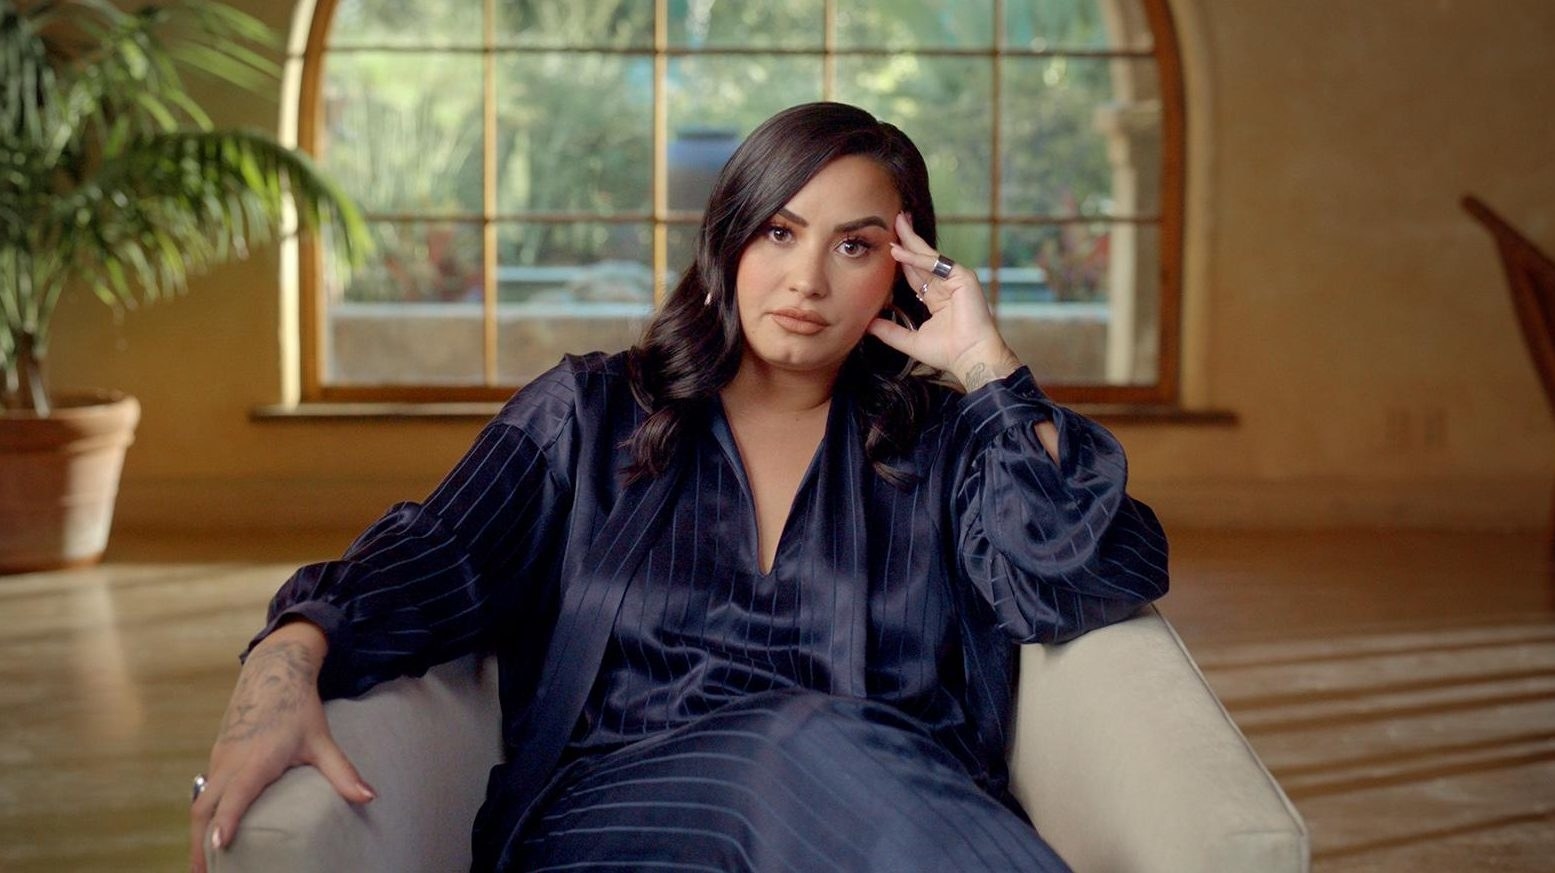 Lovato sitting in a chair, looking seriously at the camera